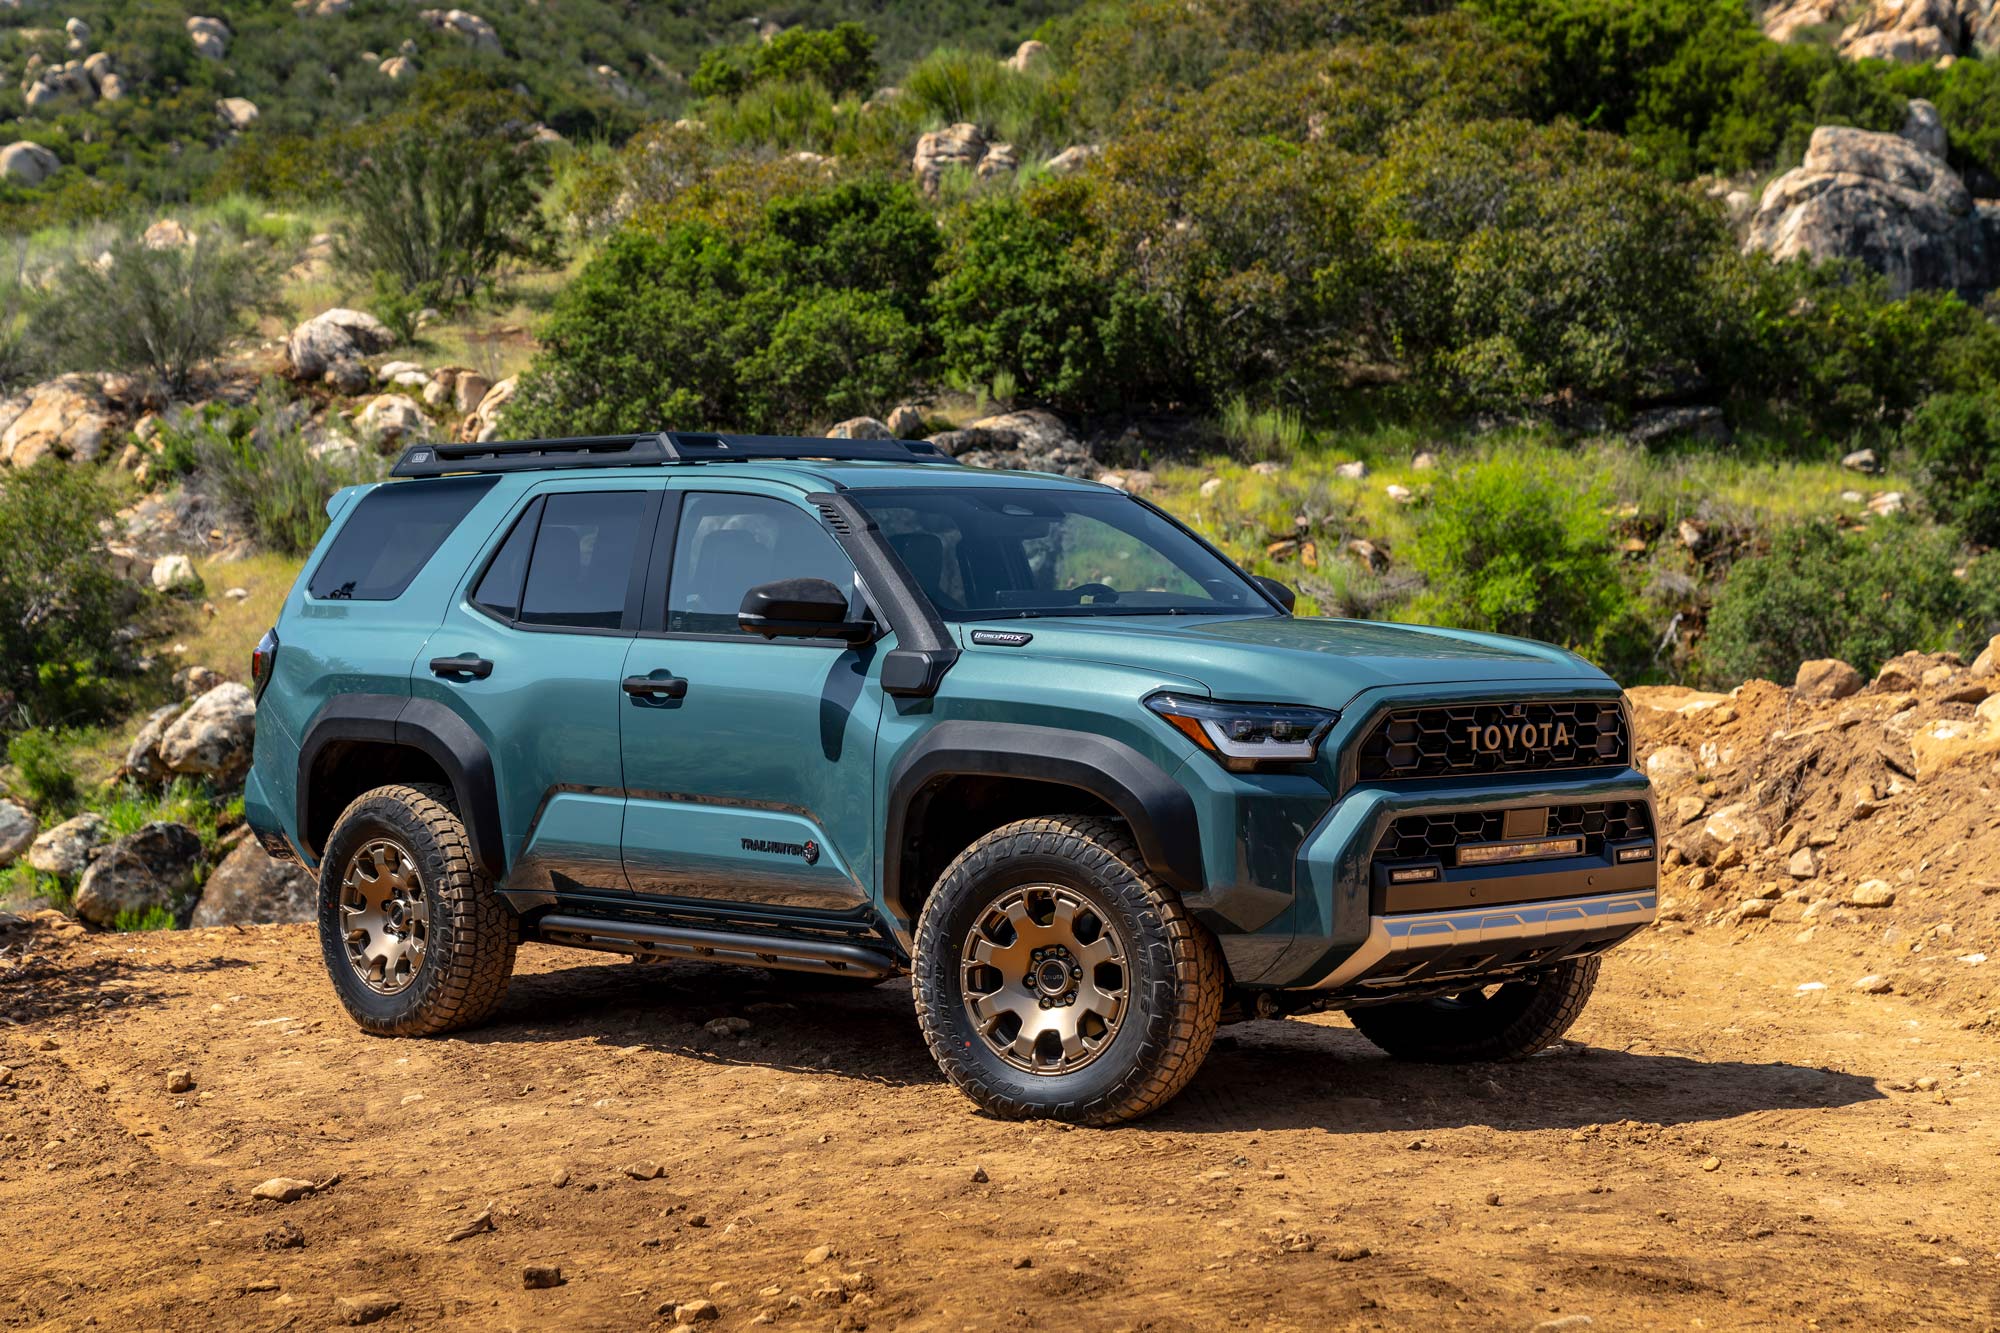 2025 Toyota 4Runner Trailhunter parked on dirt in mountains.